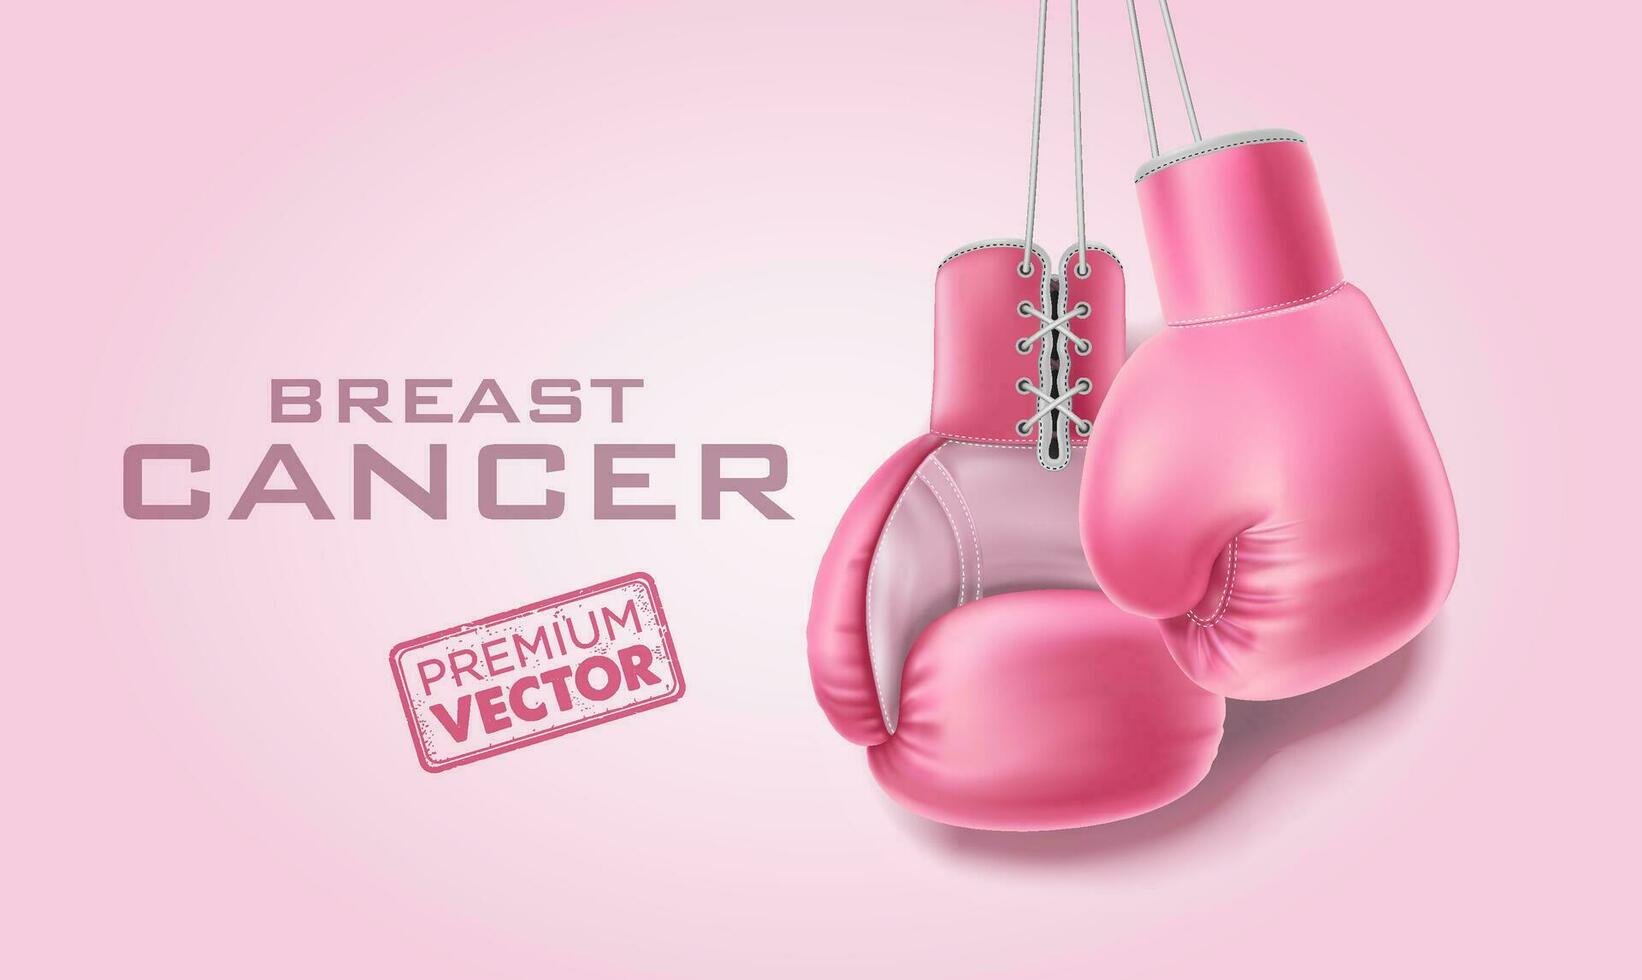 Breast cancer ribbon awareness poster with pink boxing gloves. Women's health support symbol. woman hope and struggle concept. pink vector illustration